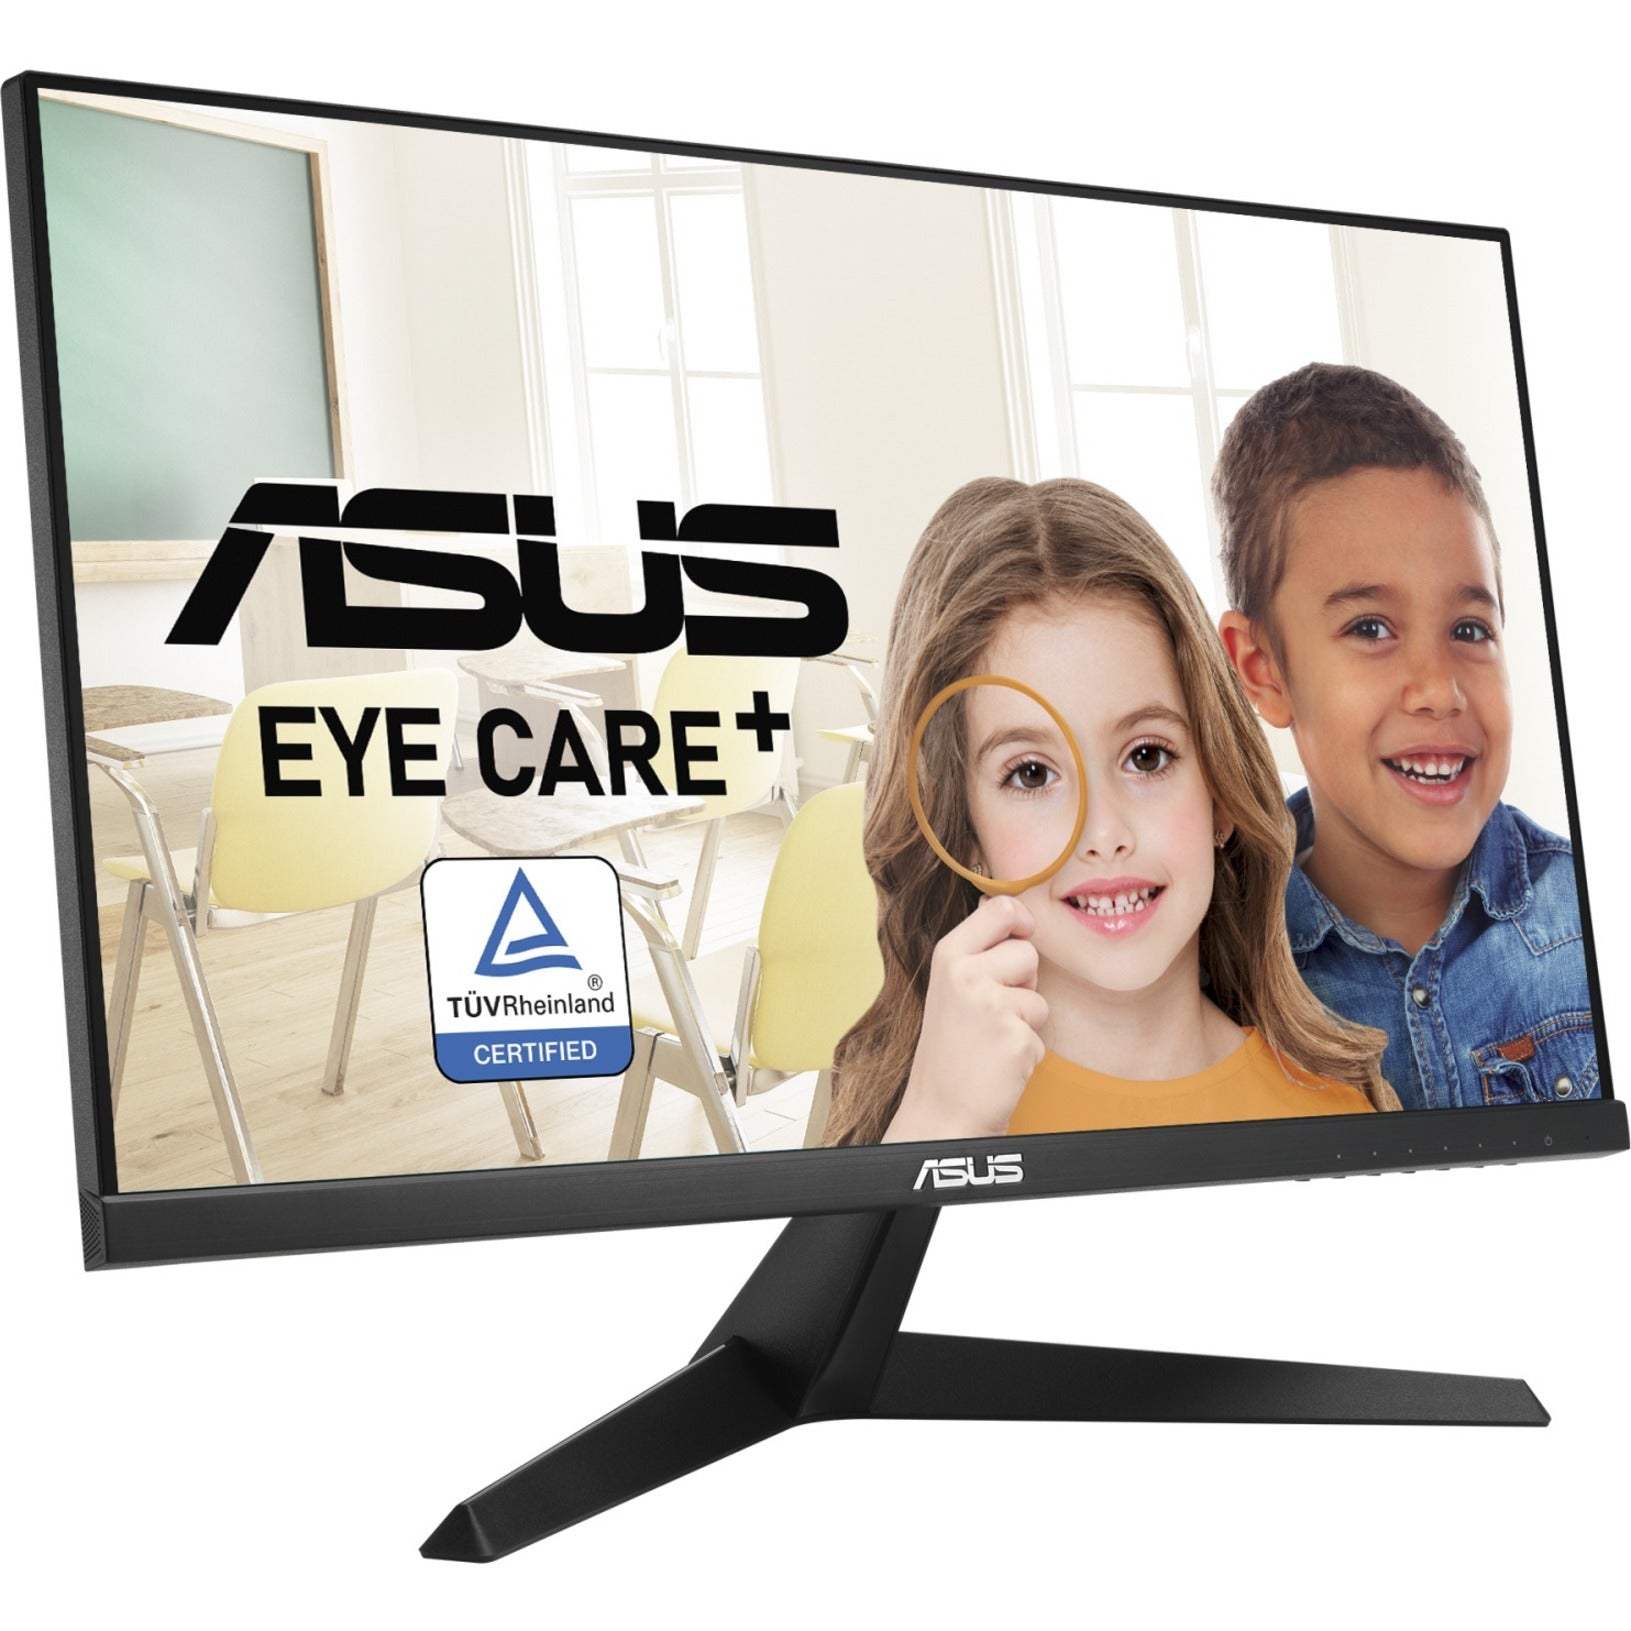 Asus VY249HE 23.8 Full HD LCD Monitor - Black, 16:9, FreeSync, 1ms Response Time